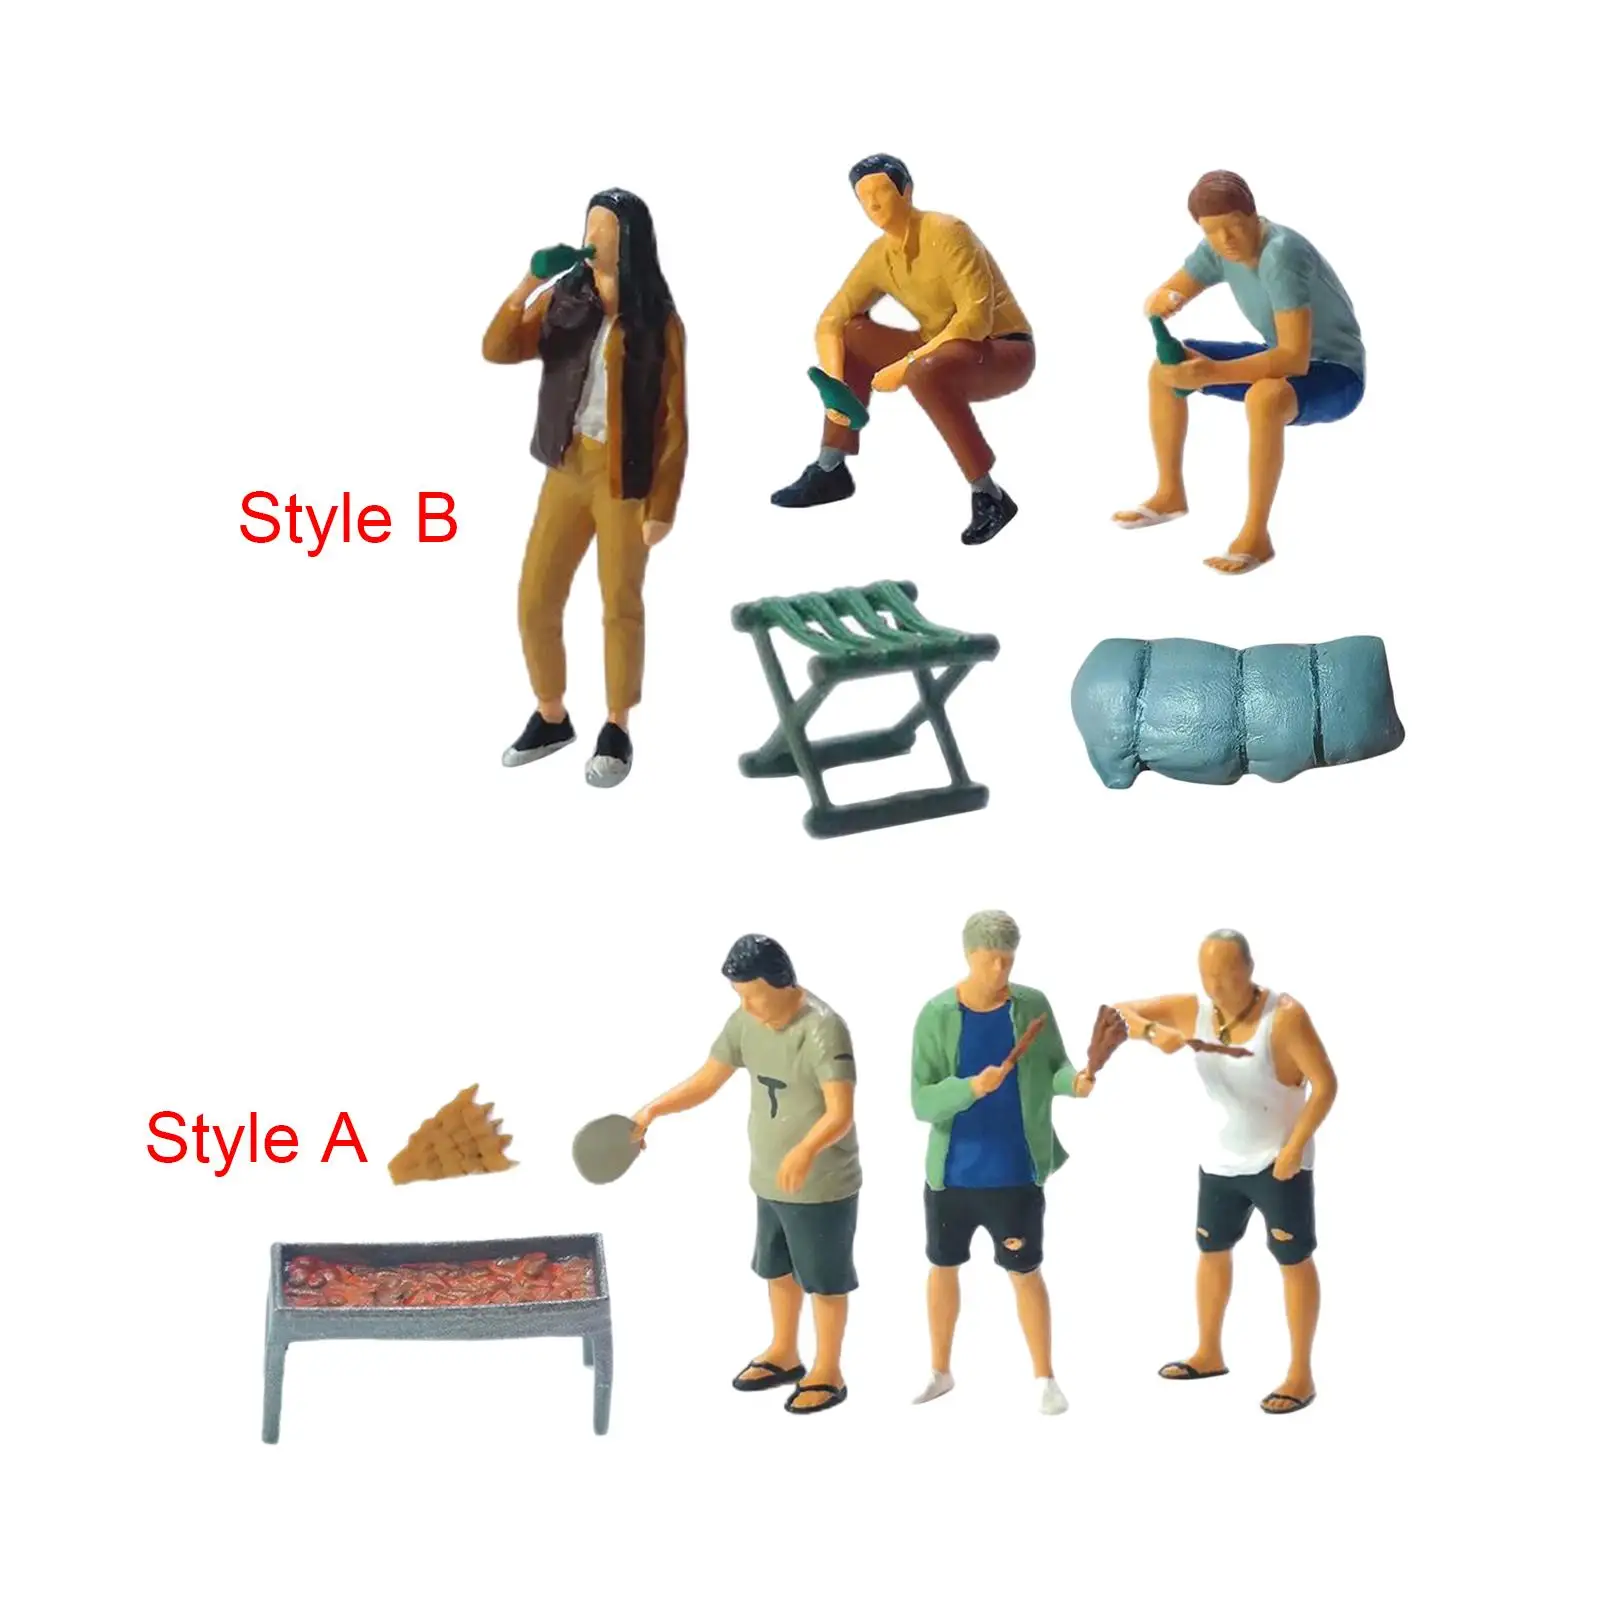 5x 1/64 BBQ Figure Model Set Collections Trains Architectural S Gauge Layout Decoration Hand Painted Figurines Decoration